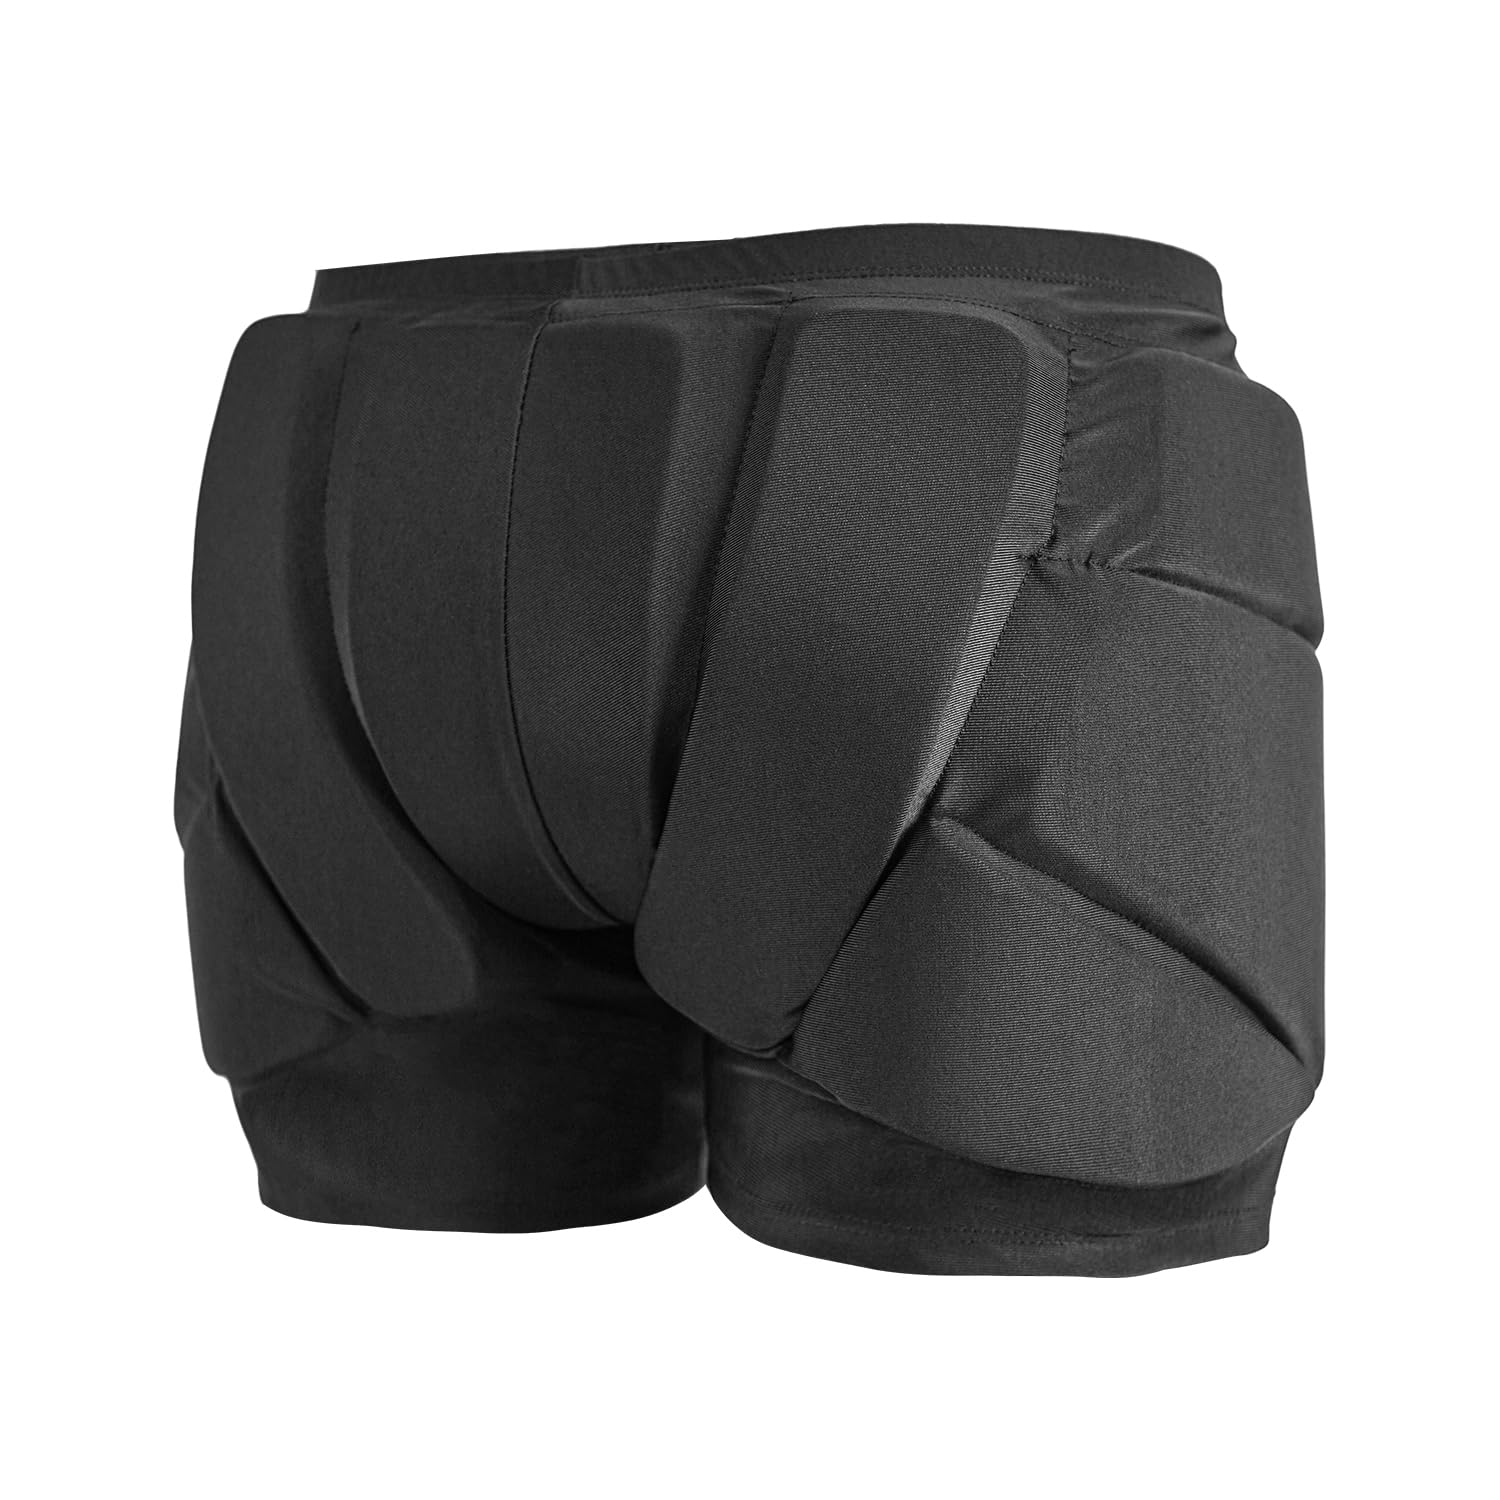 Buy AIDY-PRO Snowboard Padded Shorts Butt Pads for Skating, Ski